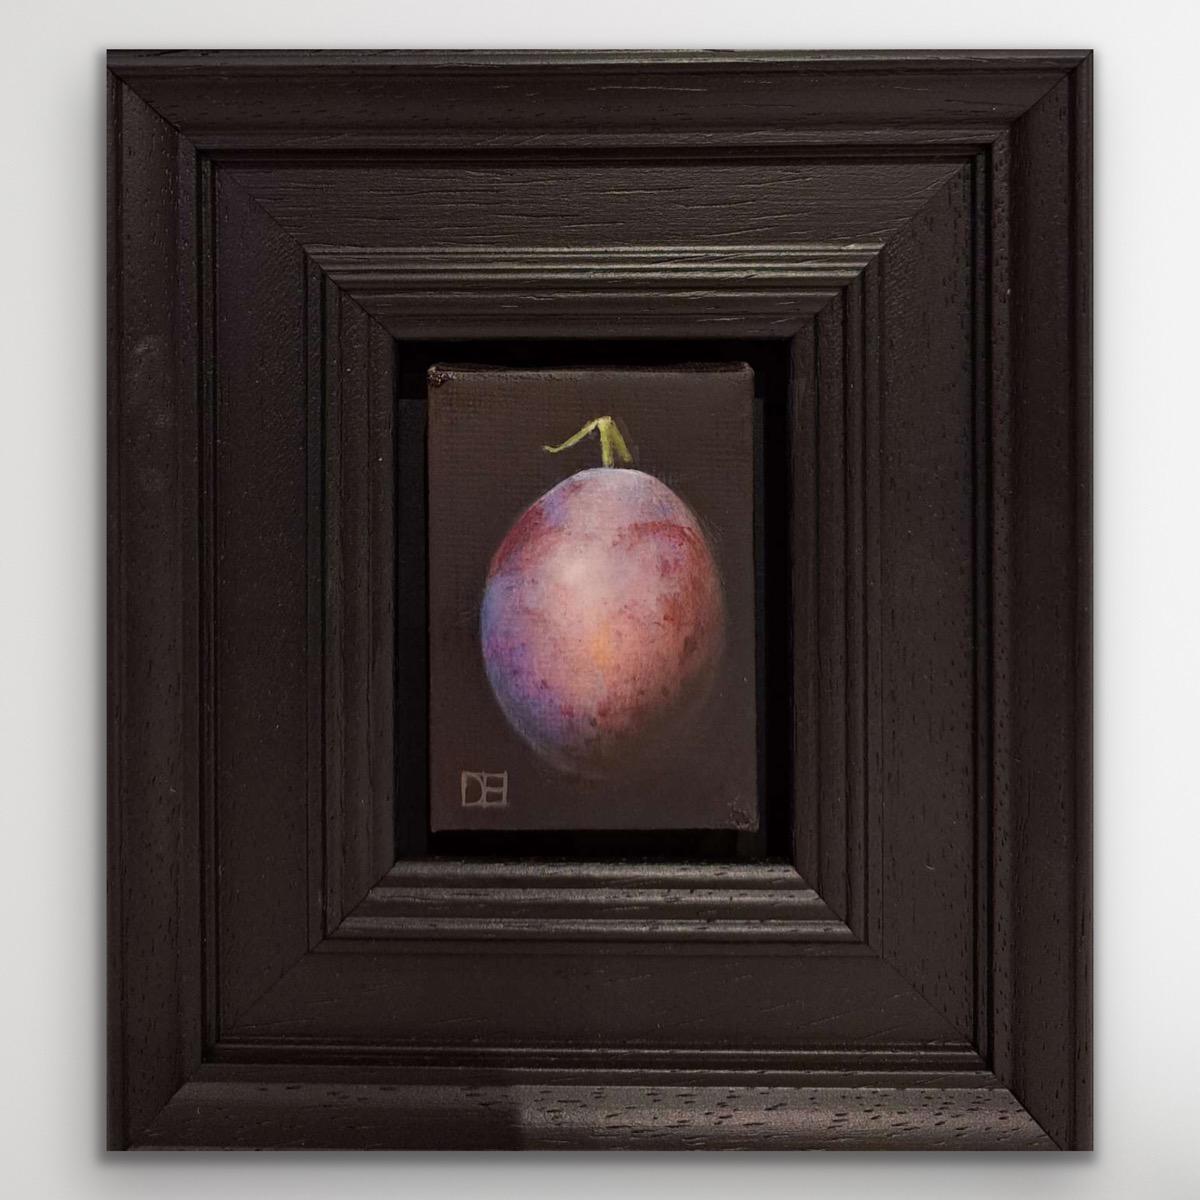 Pocket Dusky Damson is an original oil painting by Dani Humberstone as part of her Pocket Painting series featuring small scale realistic oil paintings, with a nod to baroque still life painting. The paintings are set in a black wood layered